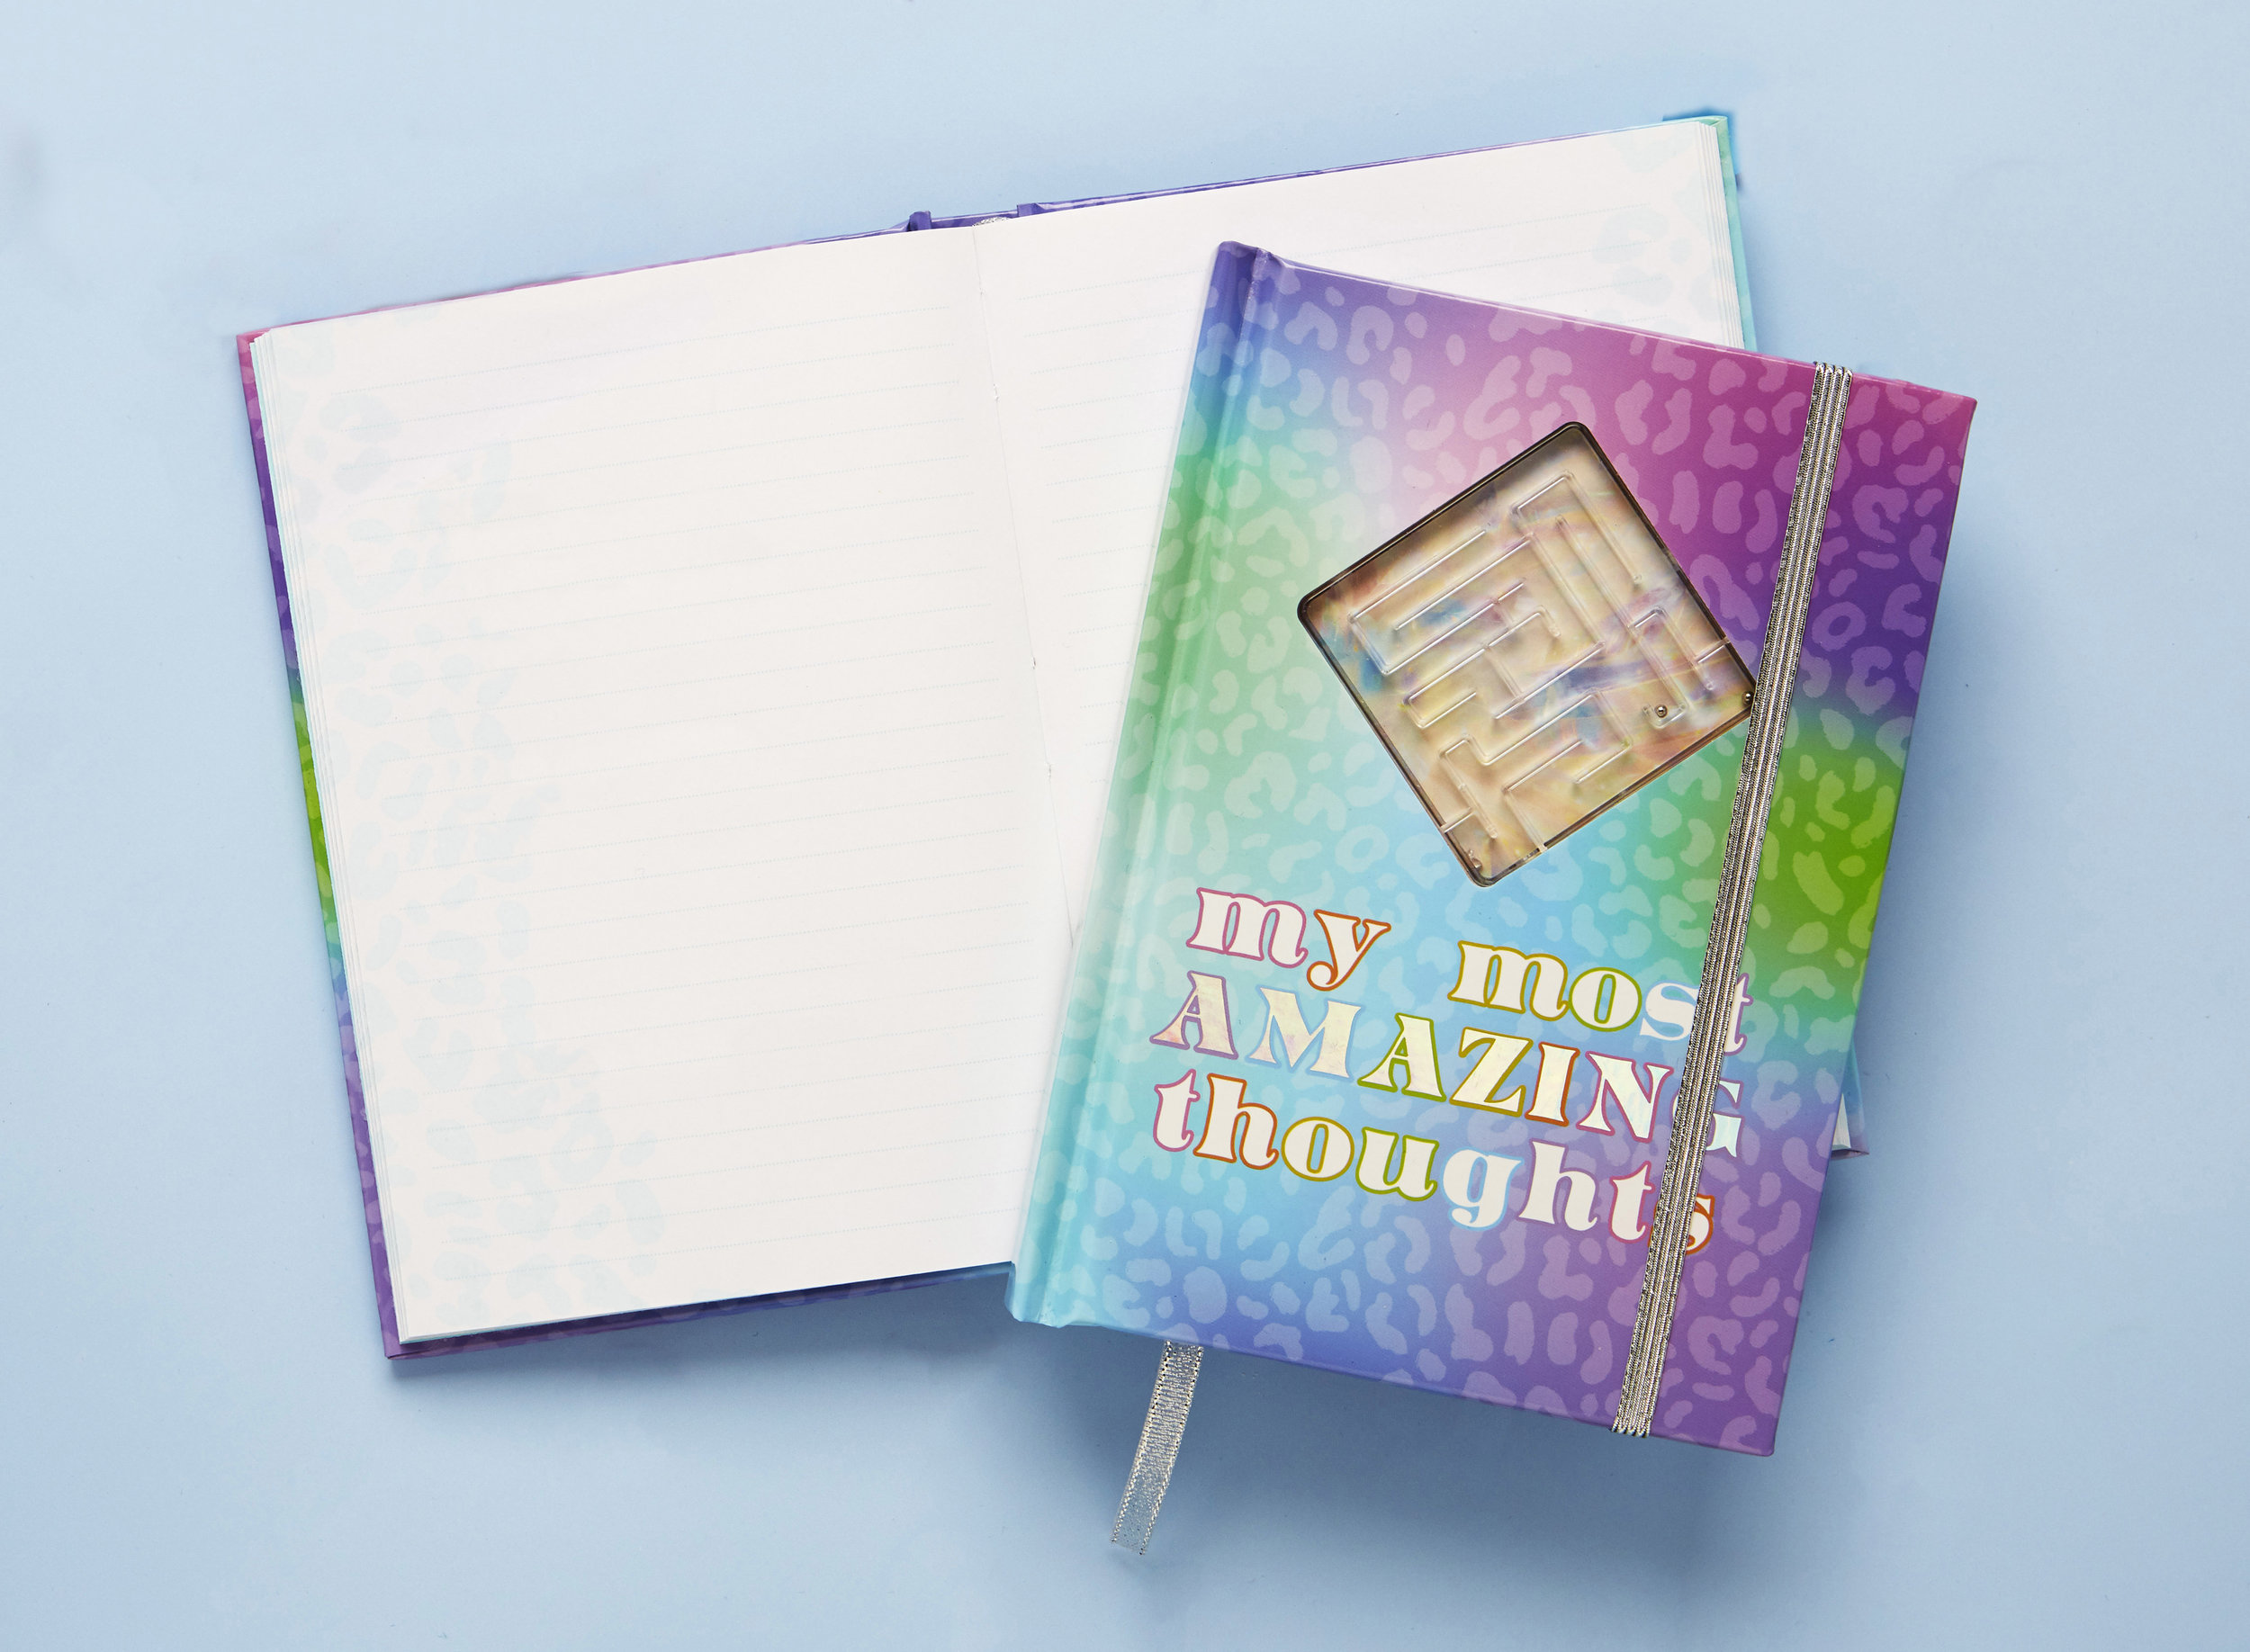  Maze Journal designs for the new  Glitter Galaxy  line of Tween Stationery 